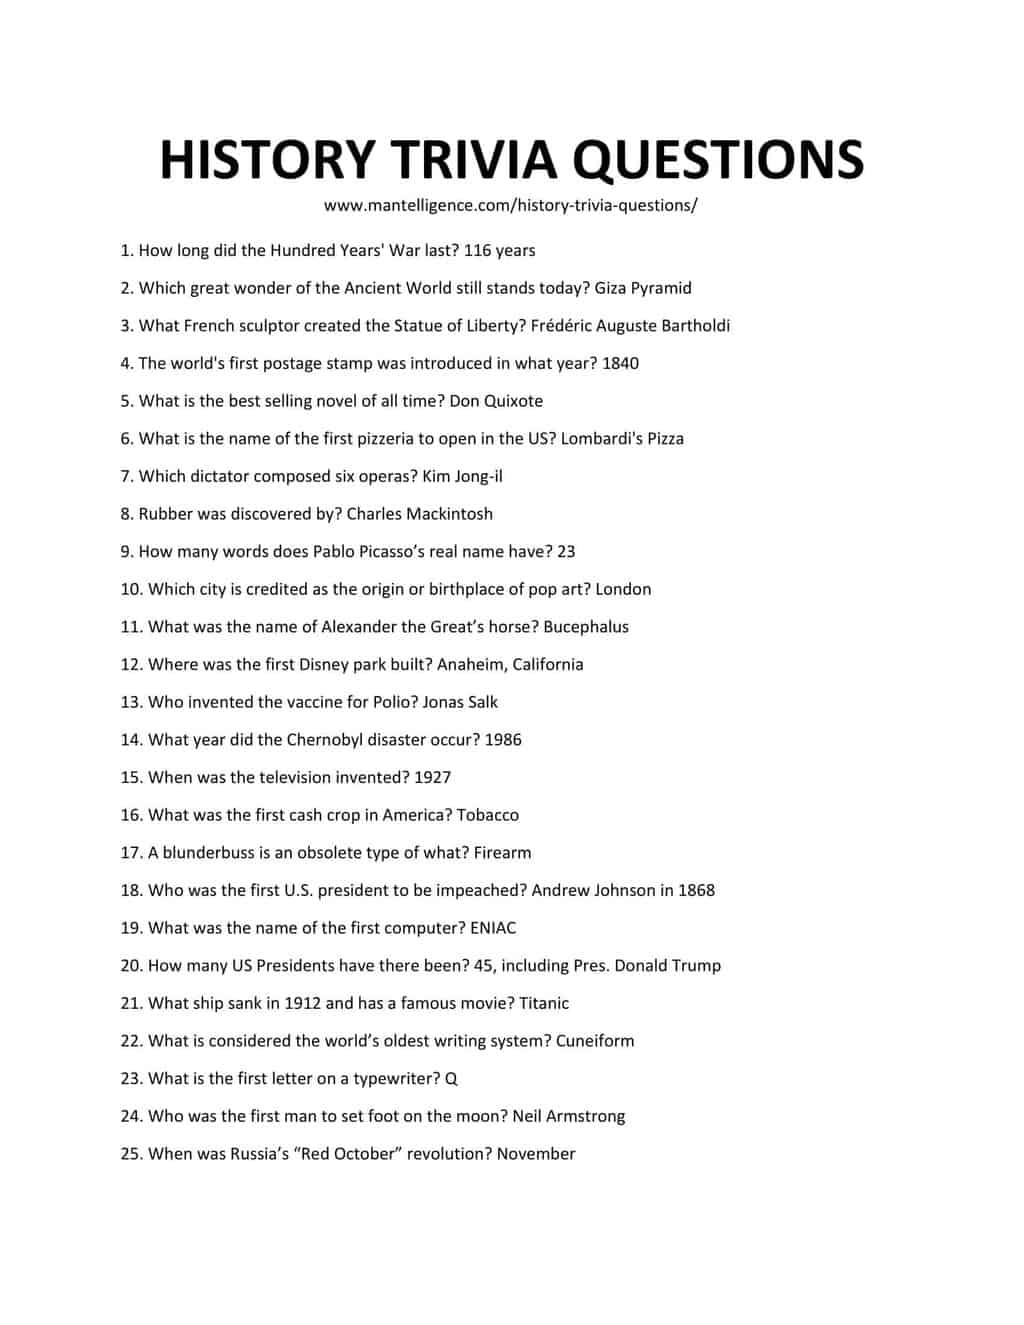 57 History Trivia Questions For Your Home Pub Quiz